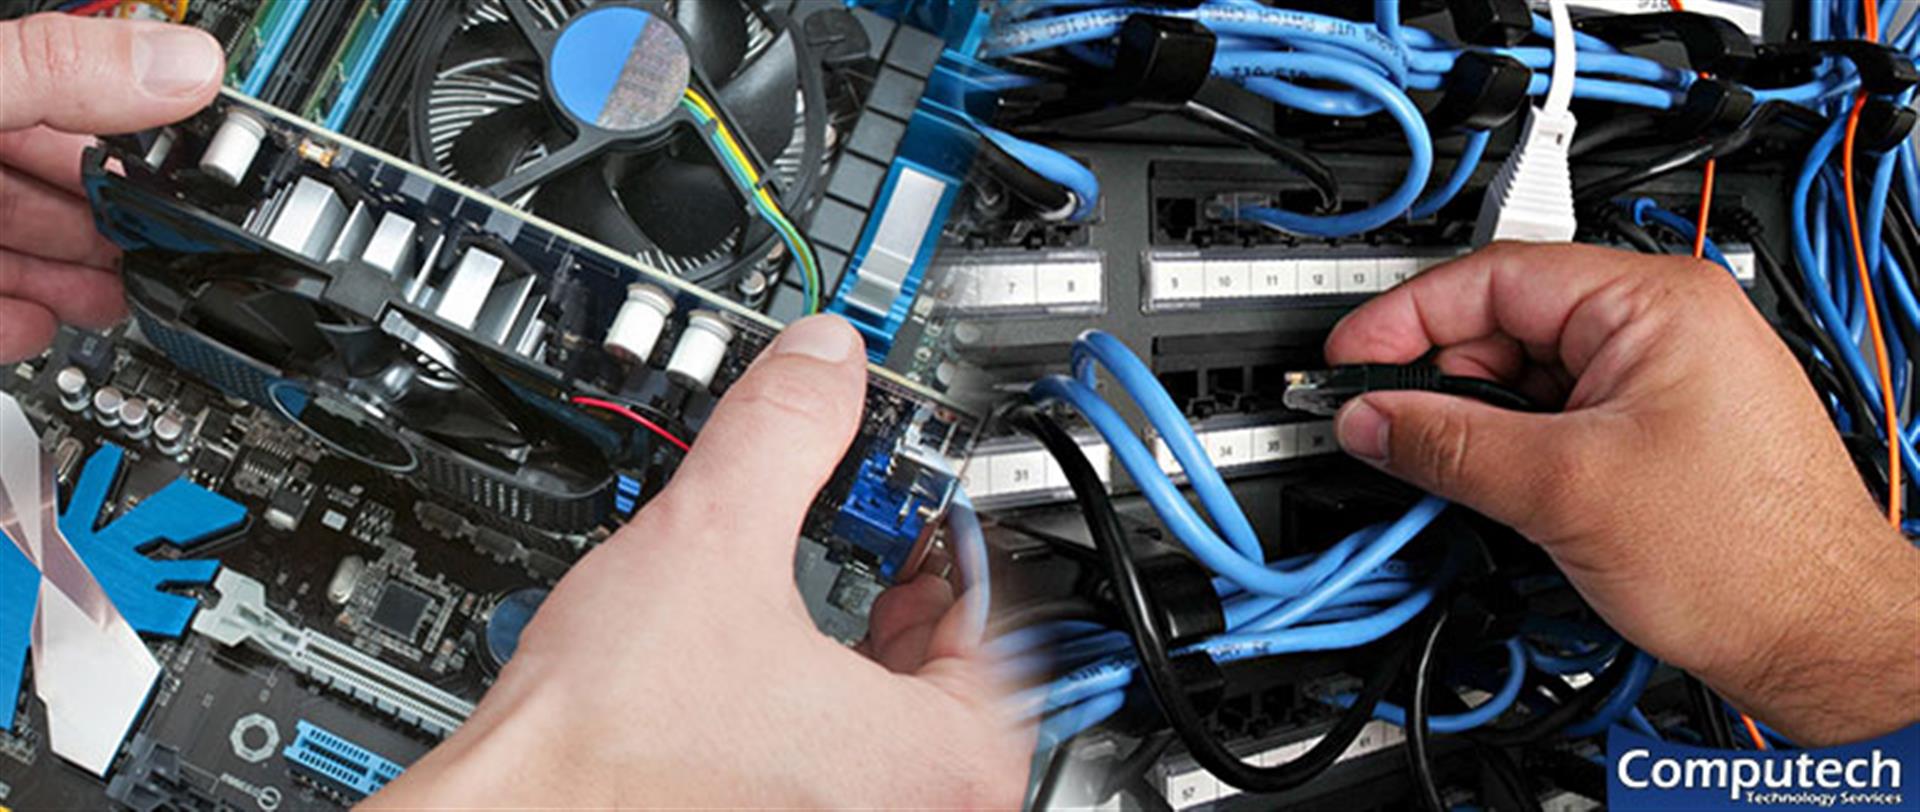 Forsyth Georgia On Site PC & Printer Repair, Network, Voice & Data Cabling Services